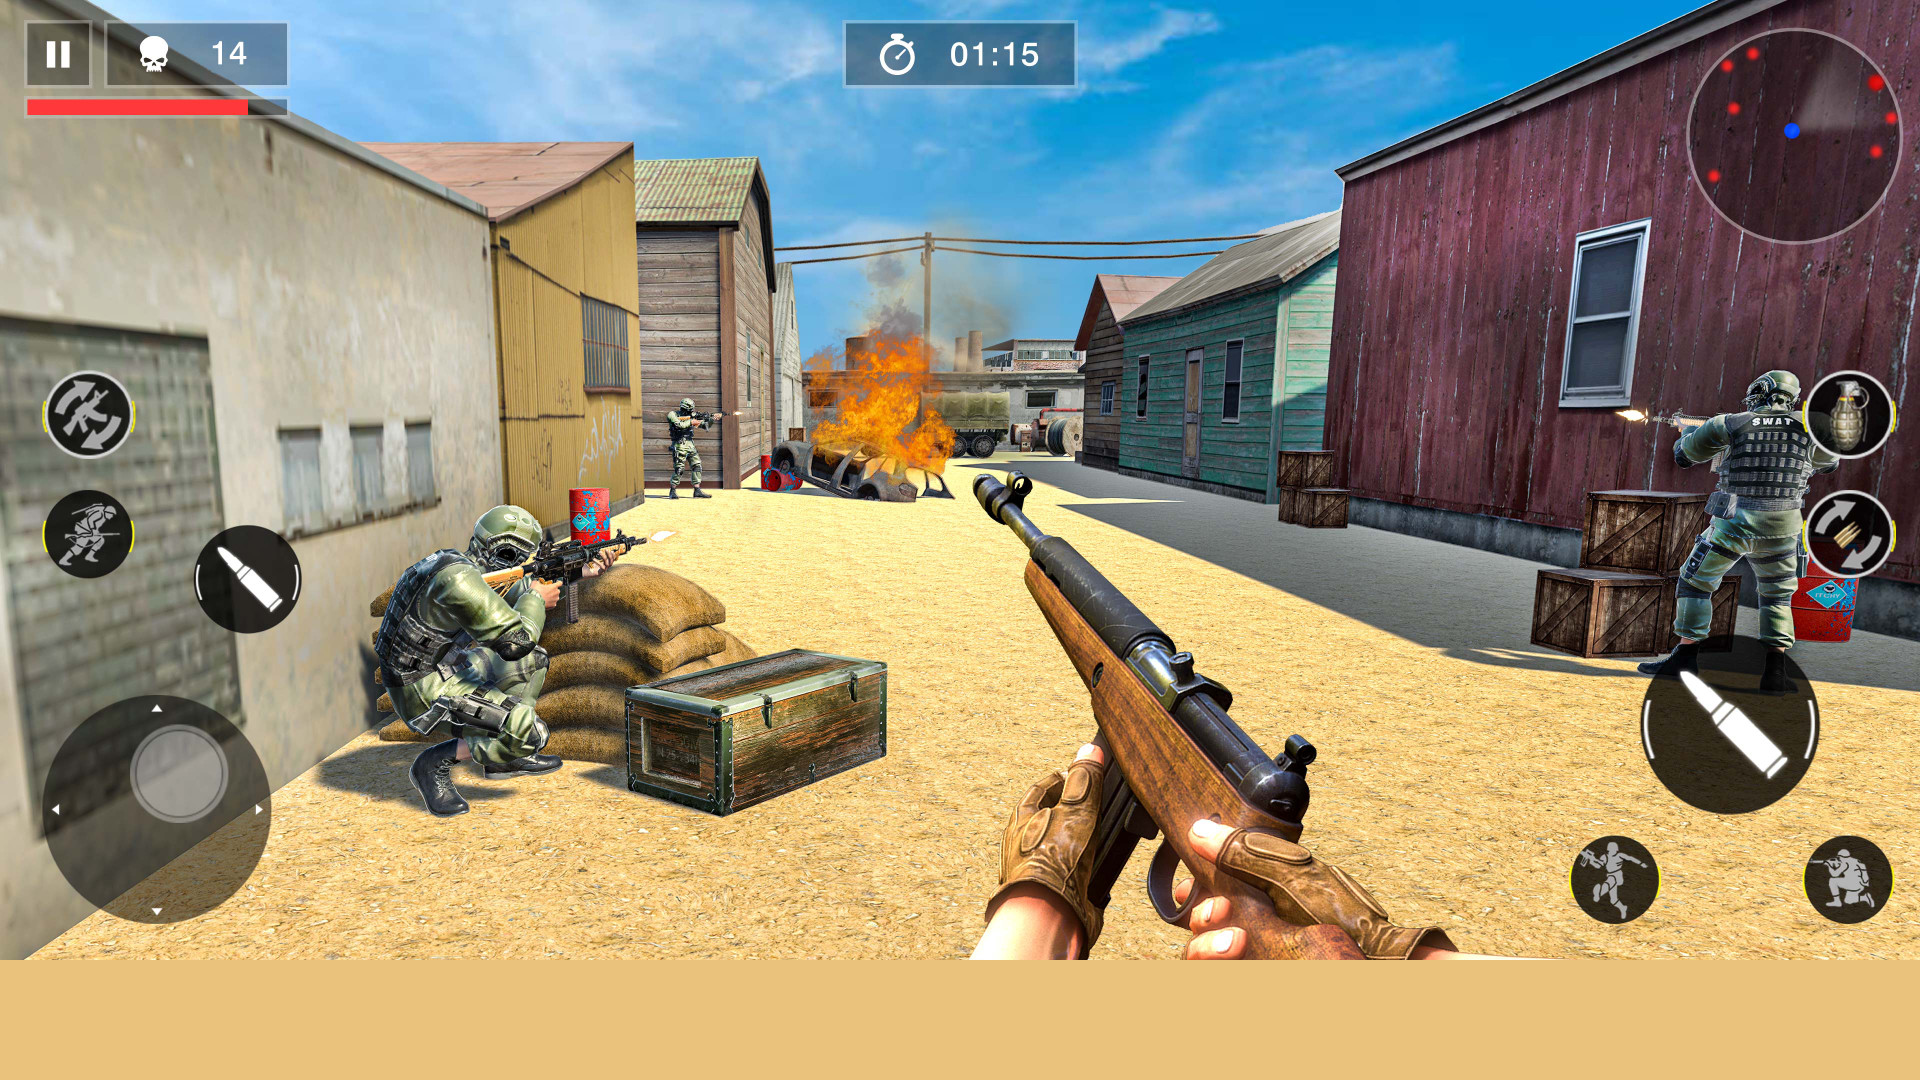 FPS Commando Strike 3D para Android - Download